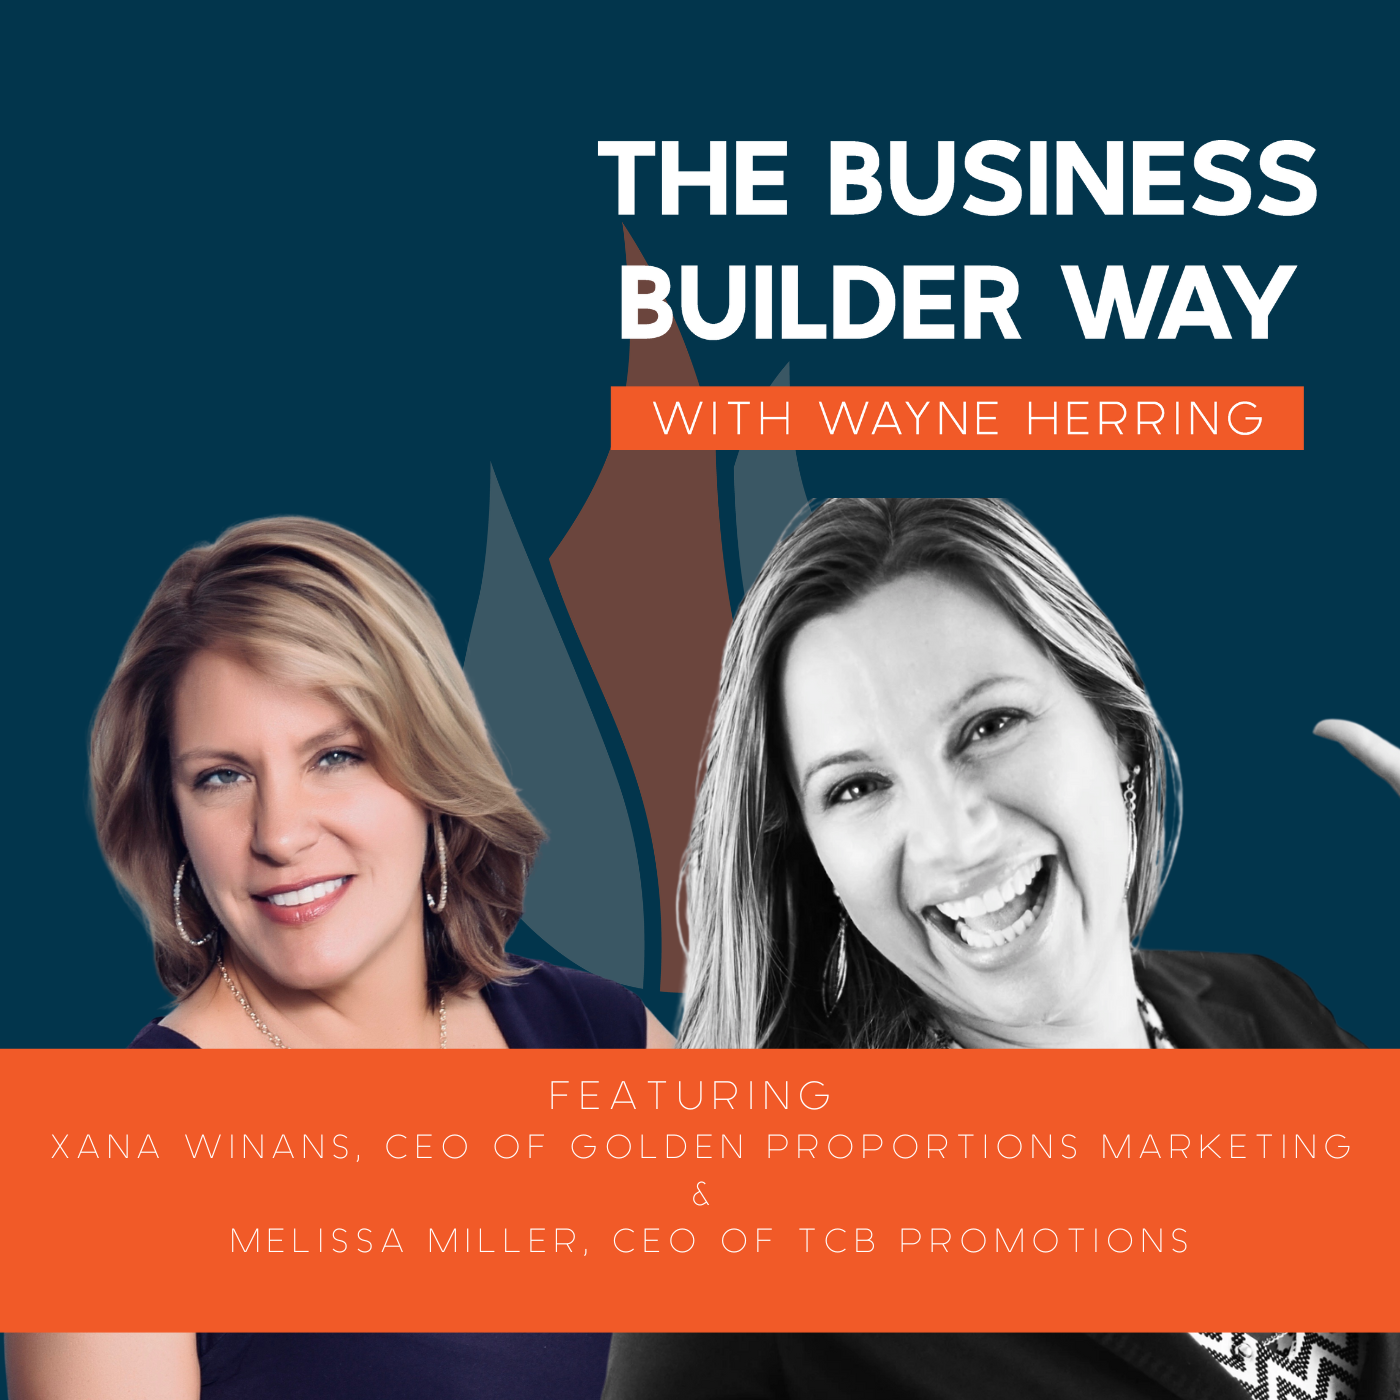 Business Builder Way Podcast image featuring Xana Winans & Melissa Miller.